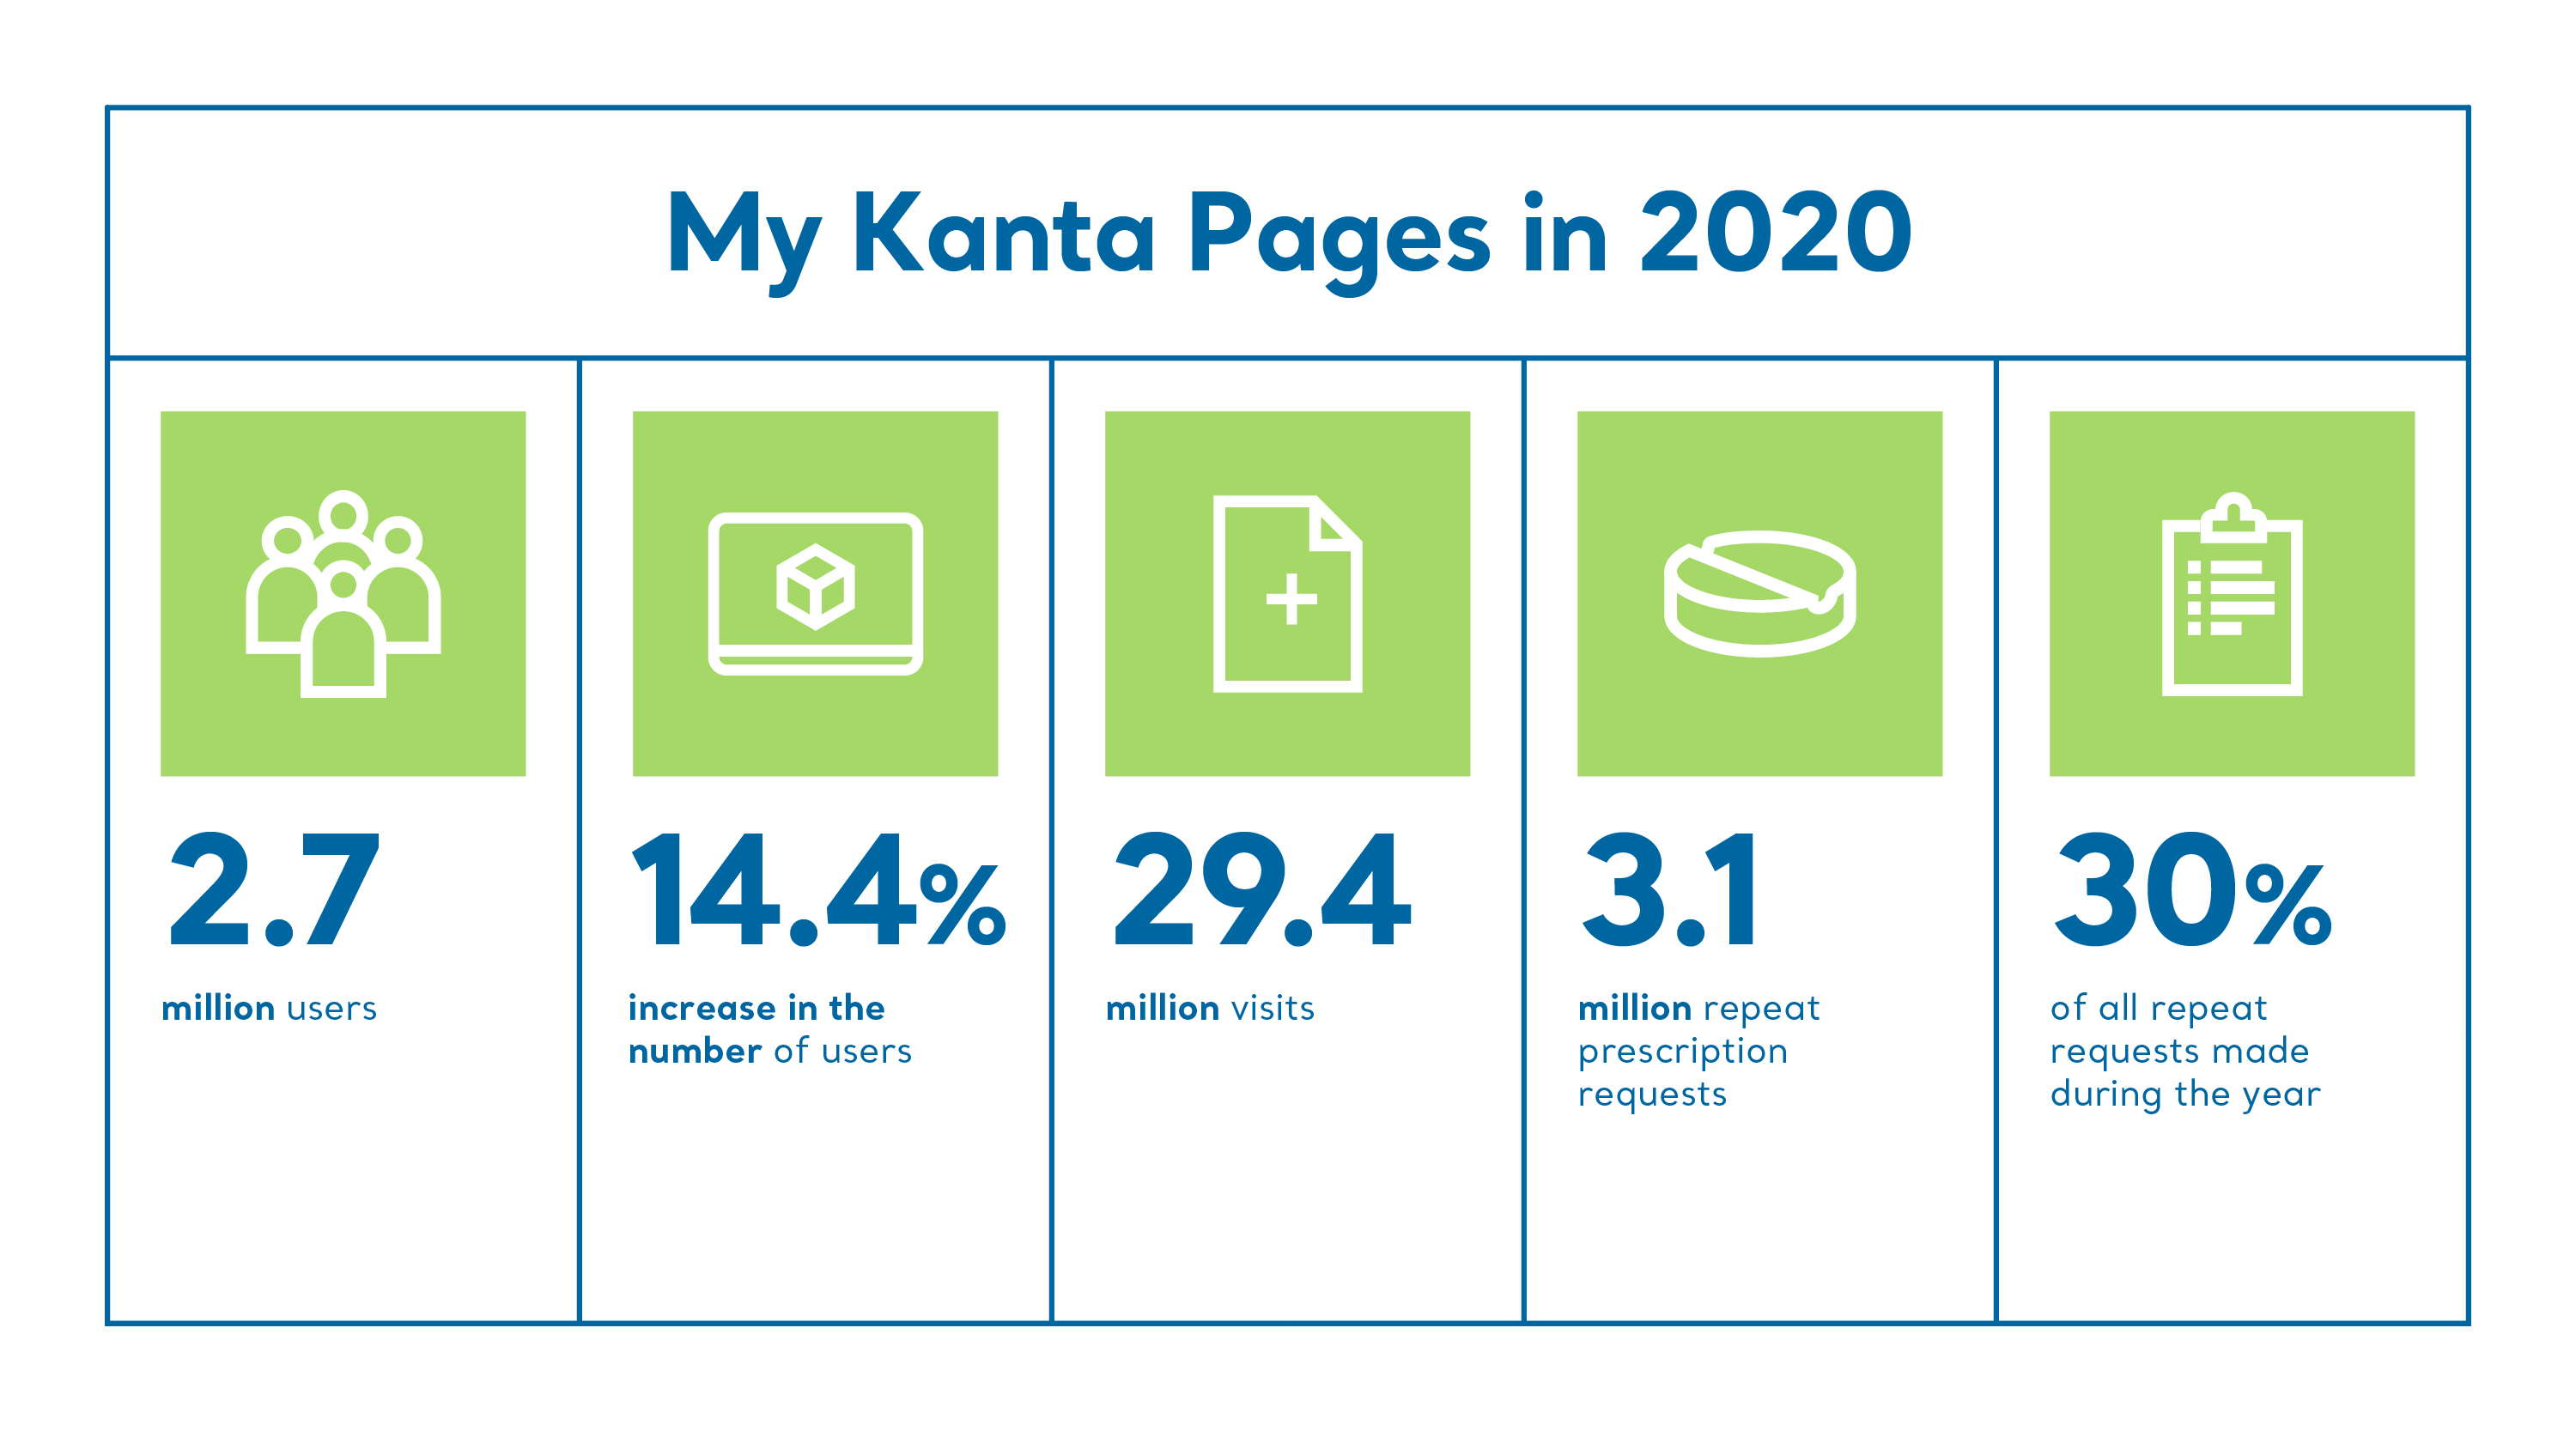 My Kanta Pages had 2.7 million users in 2020. User growth compared to the previous year was 14.4%.  In 2020, there were 29.4 million visits to My Kanta Pages. In 2020, there were 3.1 million prescription renewal requests in My Kanta Pages. This was 30% of all renewal requests made during the year.  